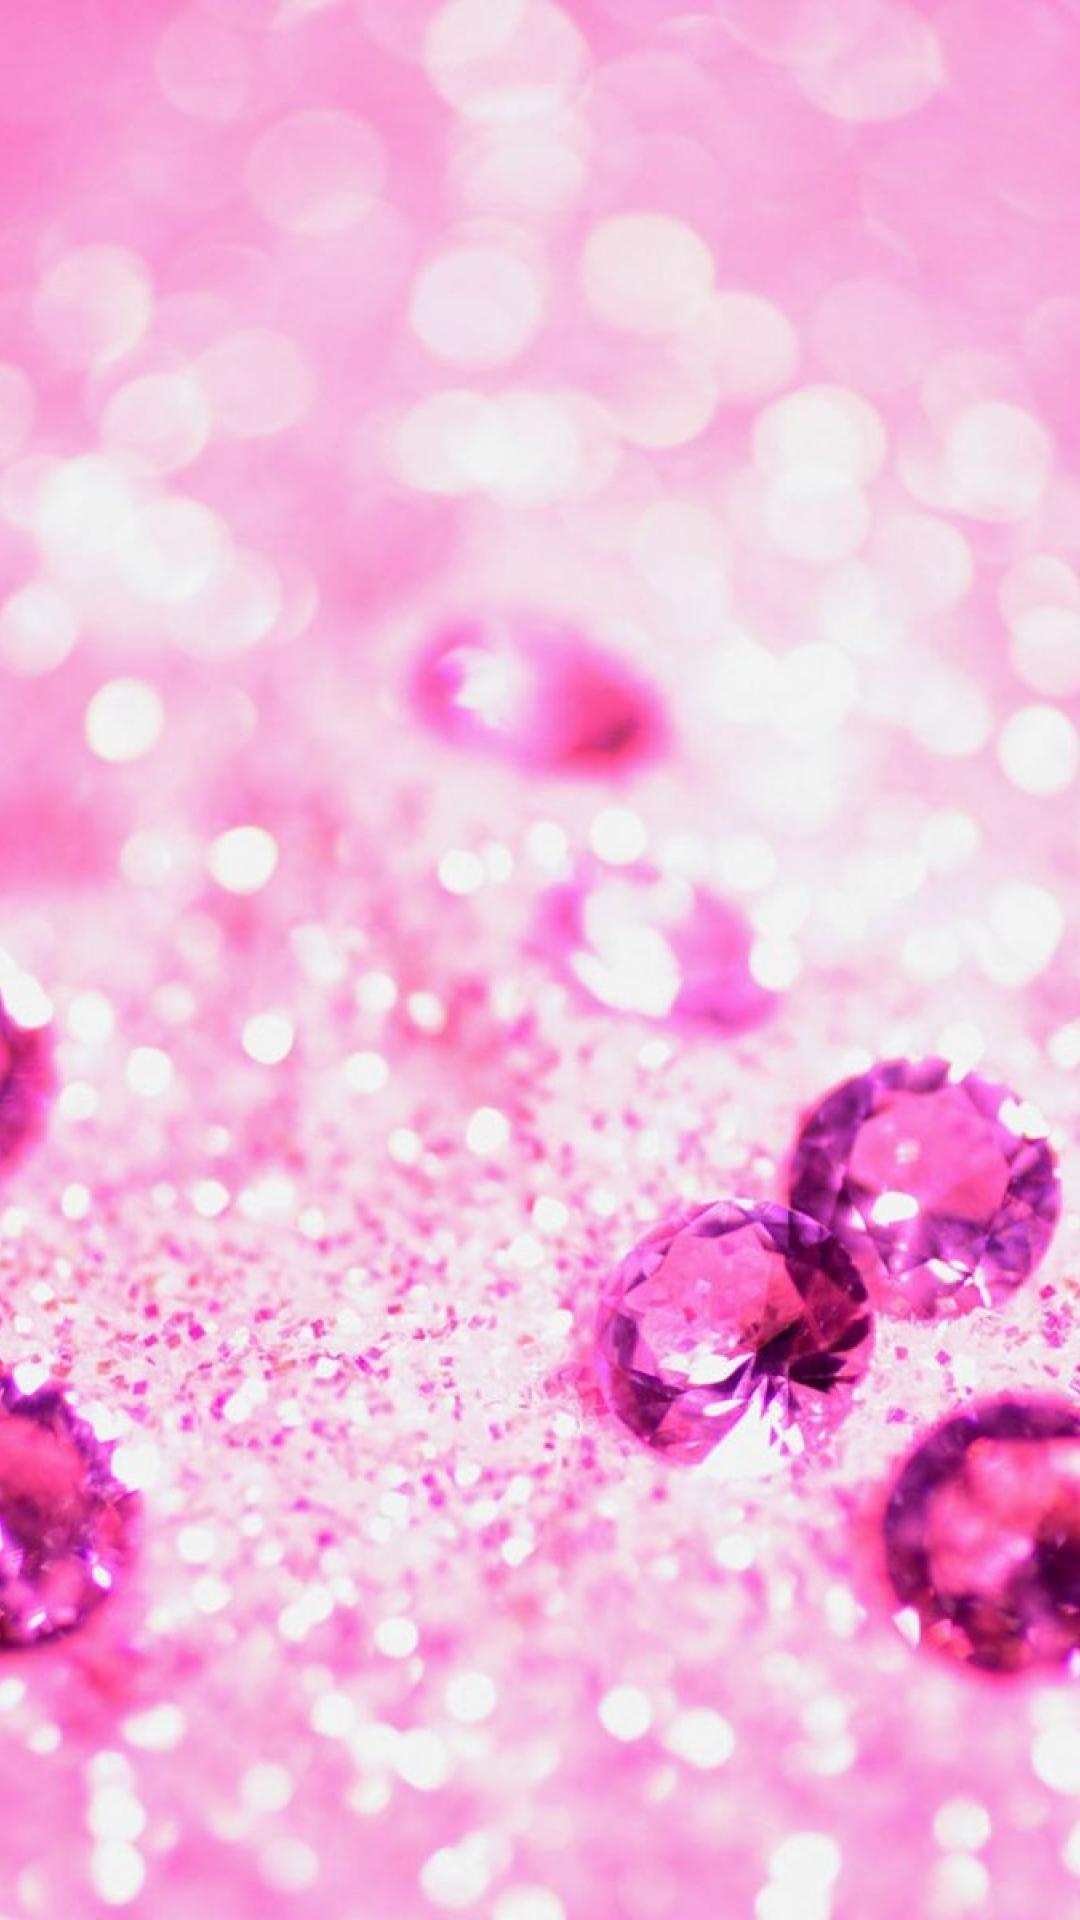 Lots Of Pink Jewelry - Girly Phone Backgrounds , HD Wallpaper & Backgrounds